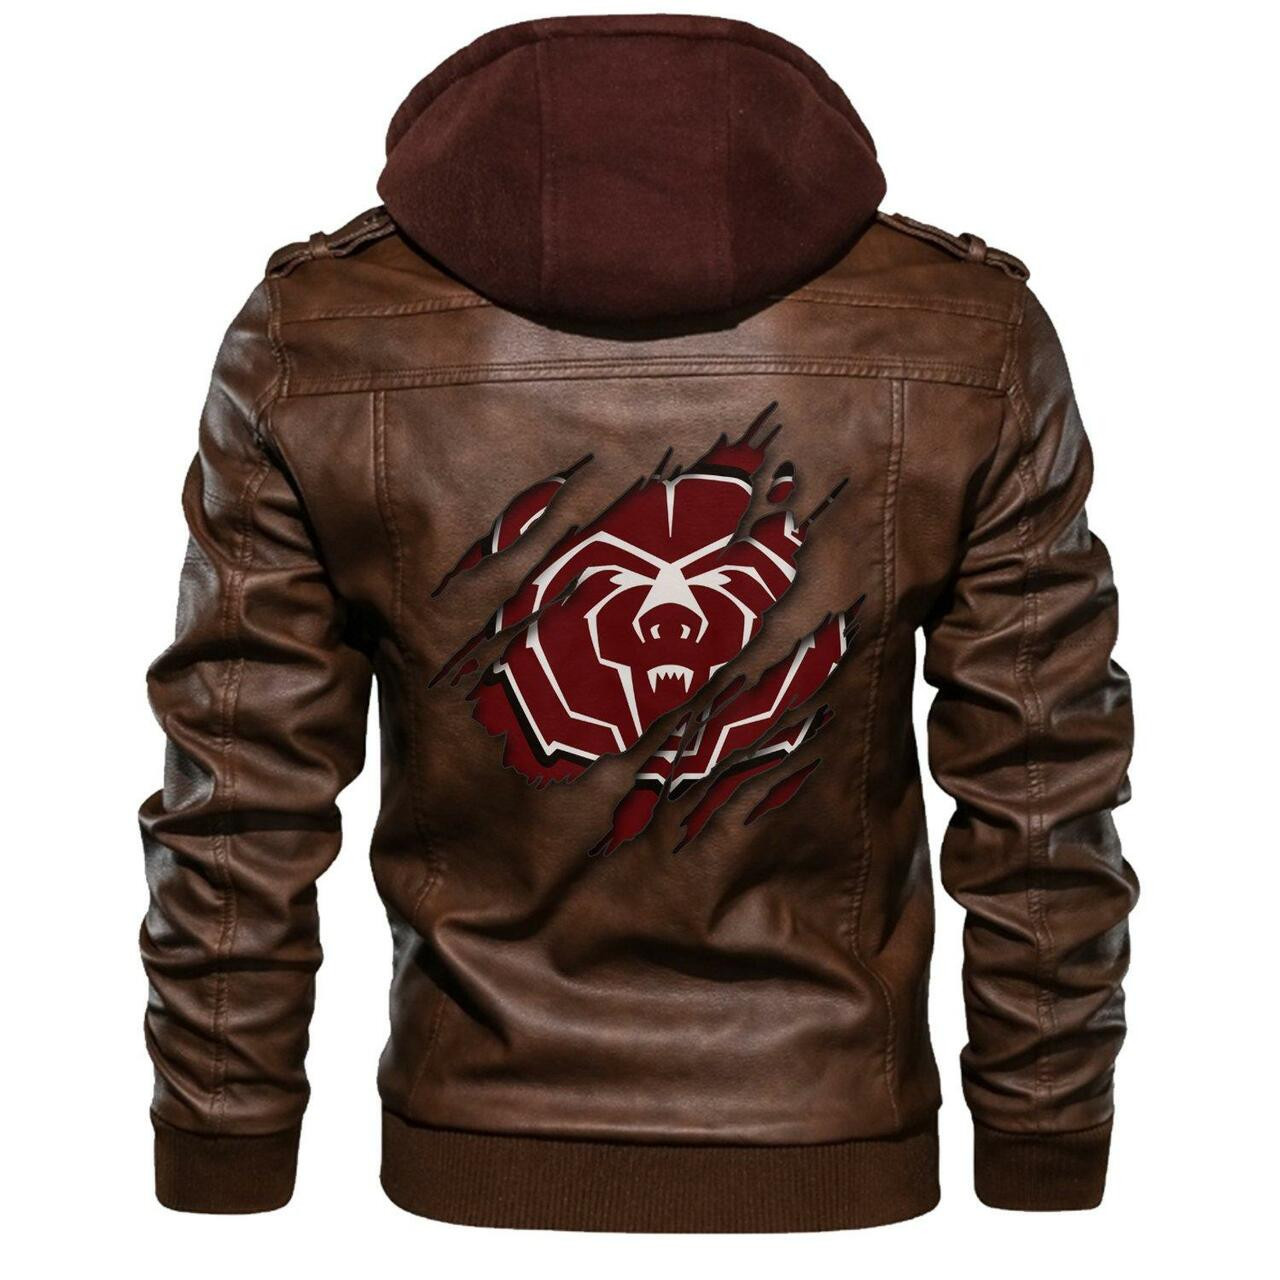 If you're looking for a new leather jacket this season - keep reading! 167